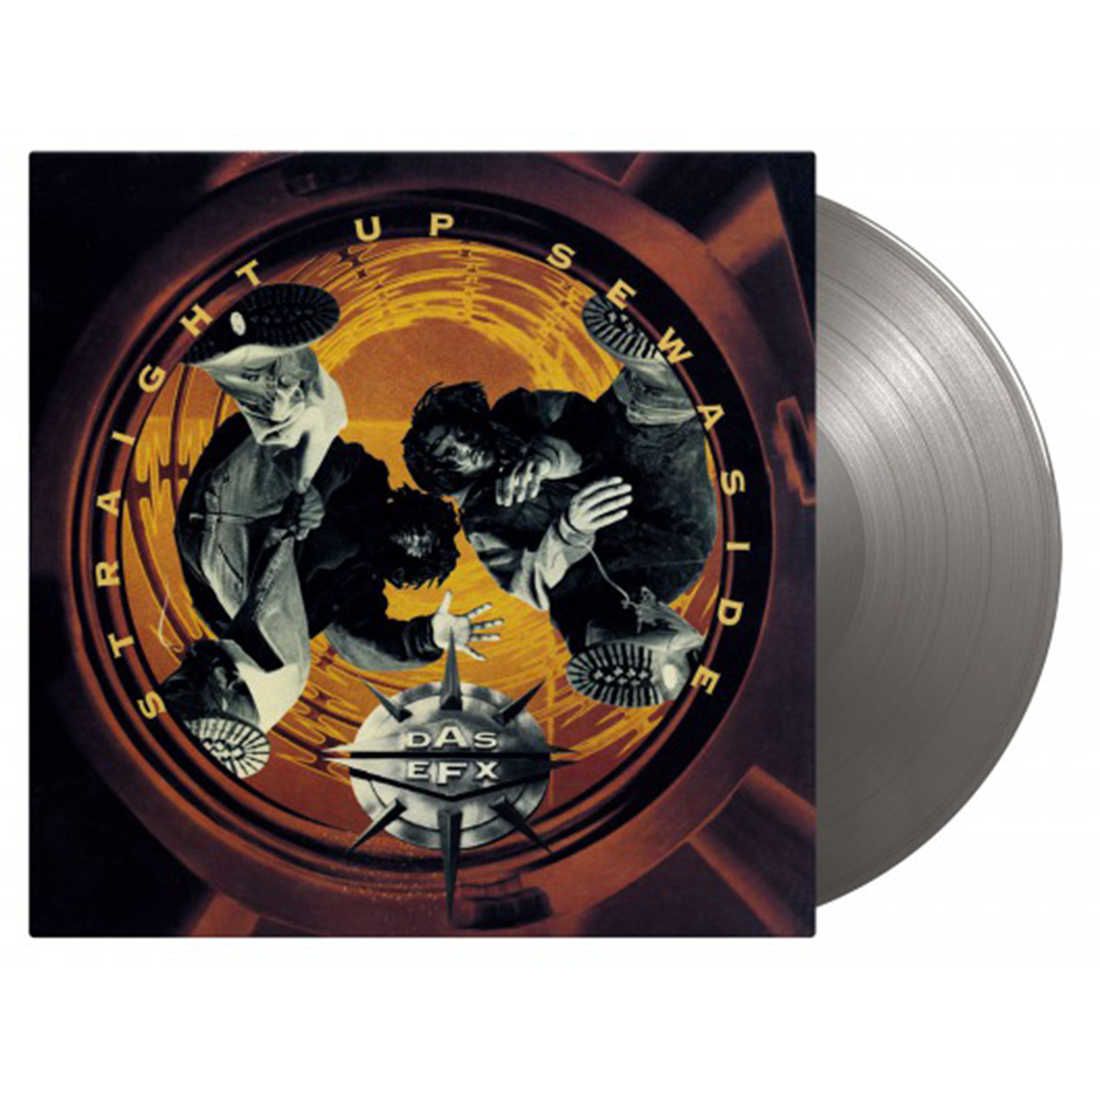 Straight Up Sewaside: Limited Edition Silver Vinyl LP